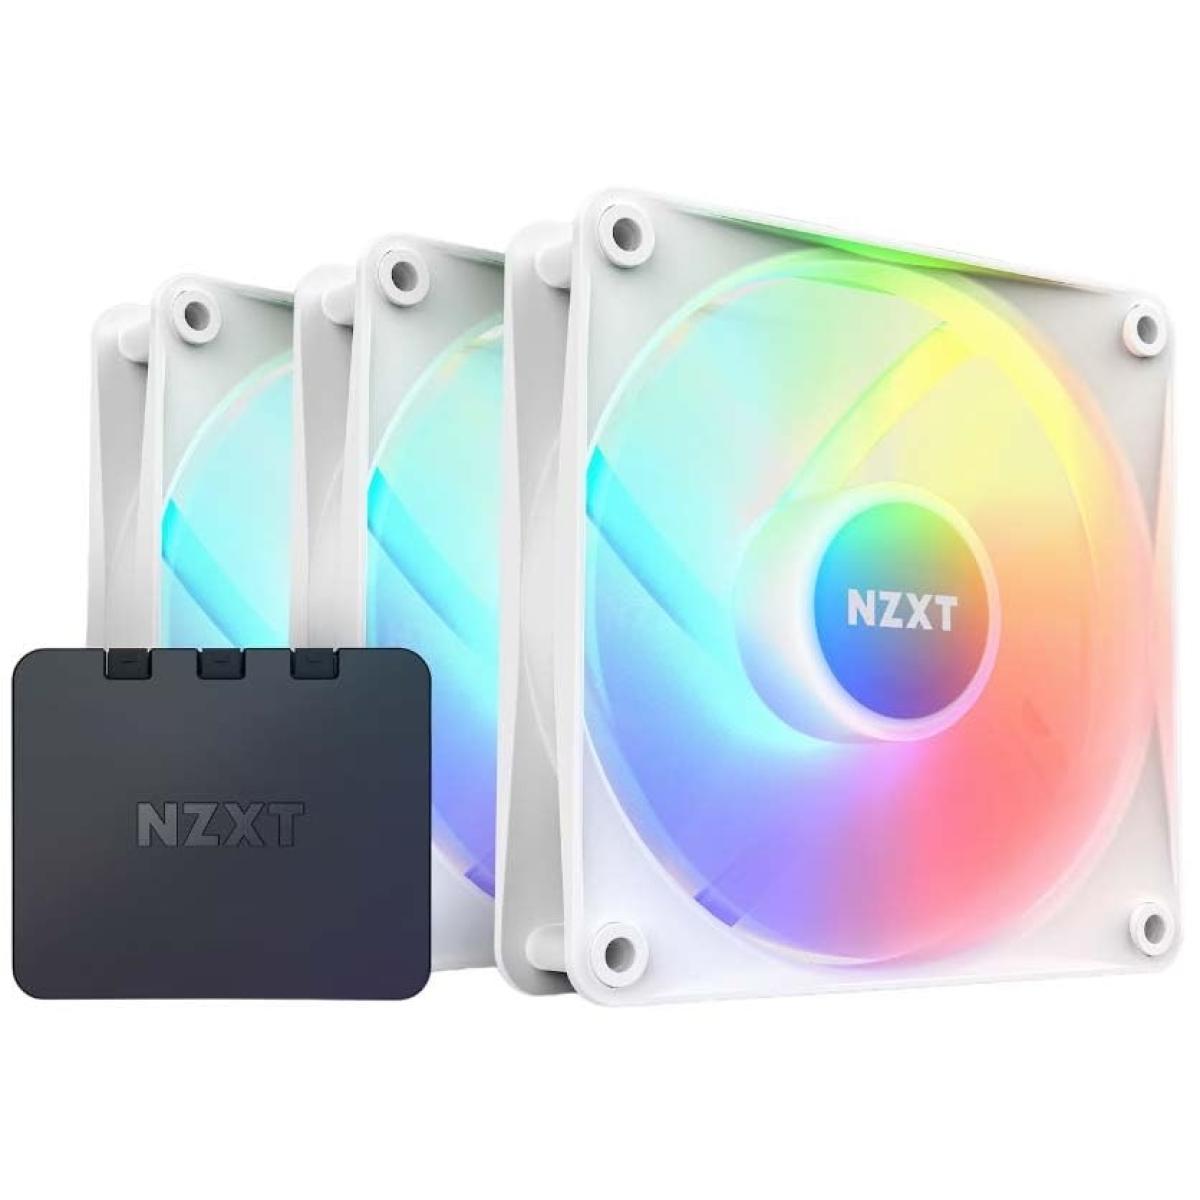 NZXT F120 RGB Core Triple Pack 3IN1 (White) PWM Airflow Fans & Controller, Fluid Dynamic Bearing (FDB) For Quiet & Cool Operations, Elegant Frame Design & Anti-Vibration Rubber Corners